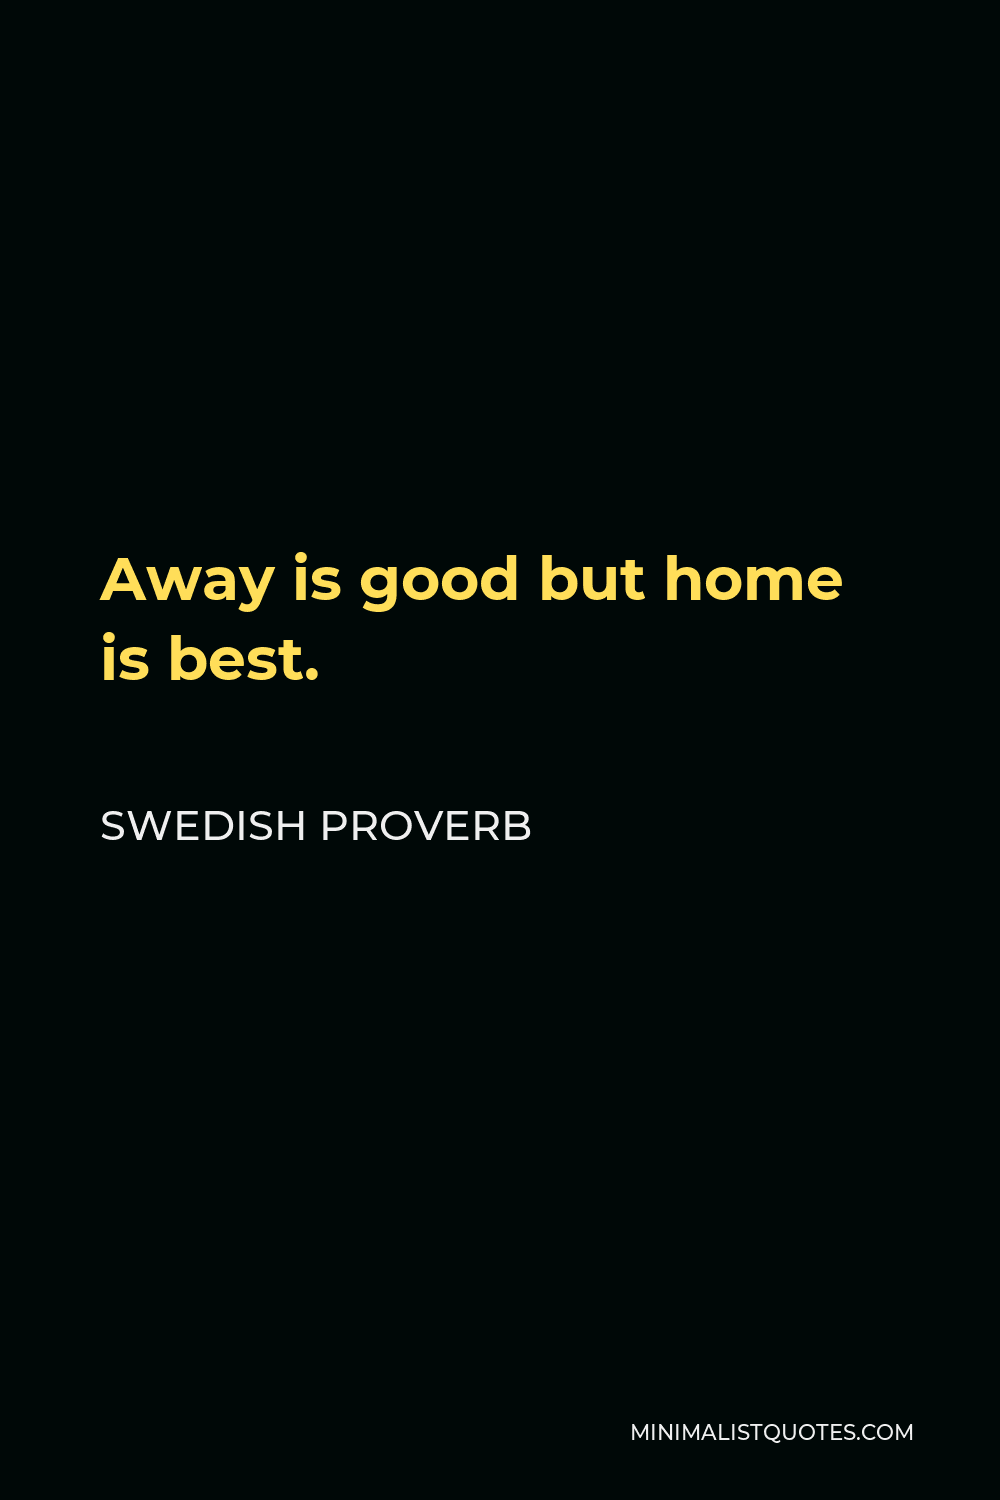 Swedish Proverb Quote - Away is good but home is best.